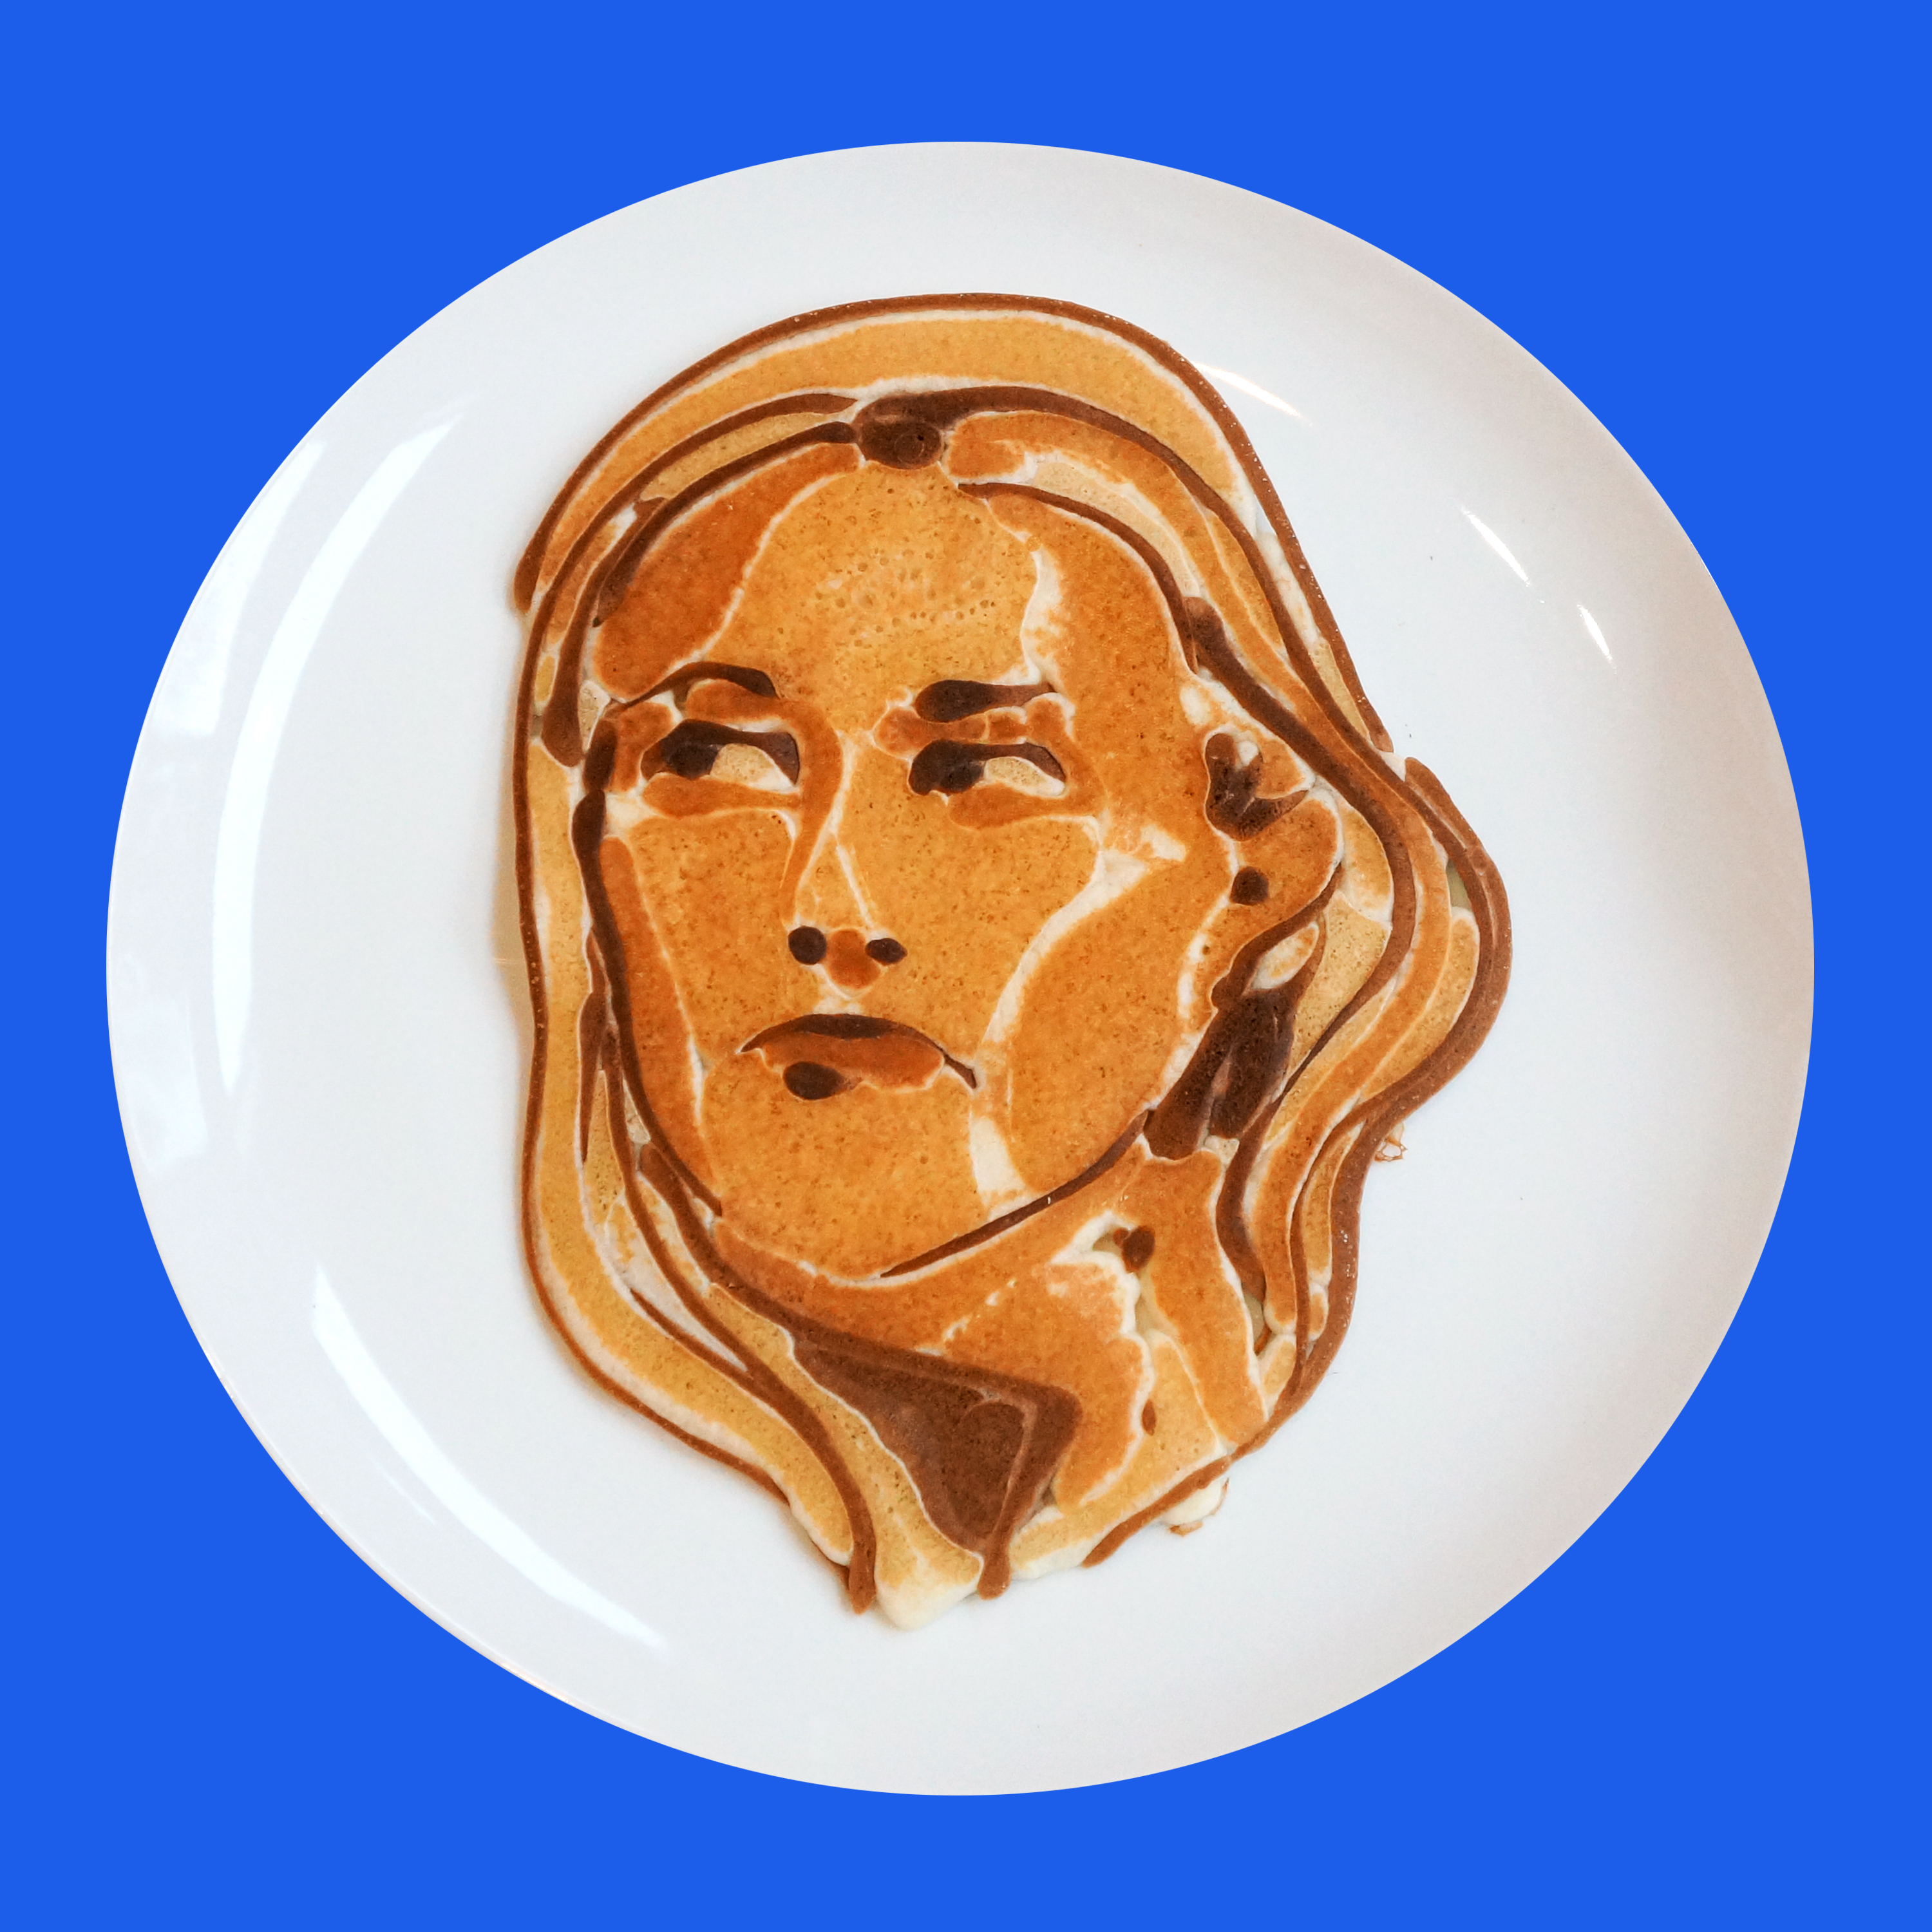 Nathan Shields creates pancake portraits of famous faces for NOW TV, Reese Witherspoon from Big Little Lies